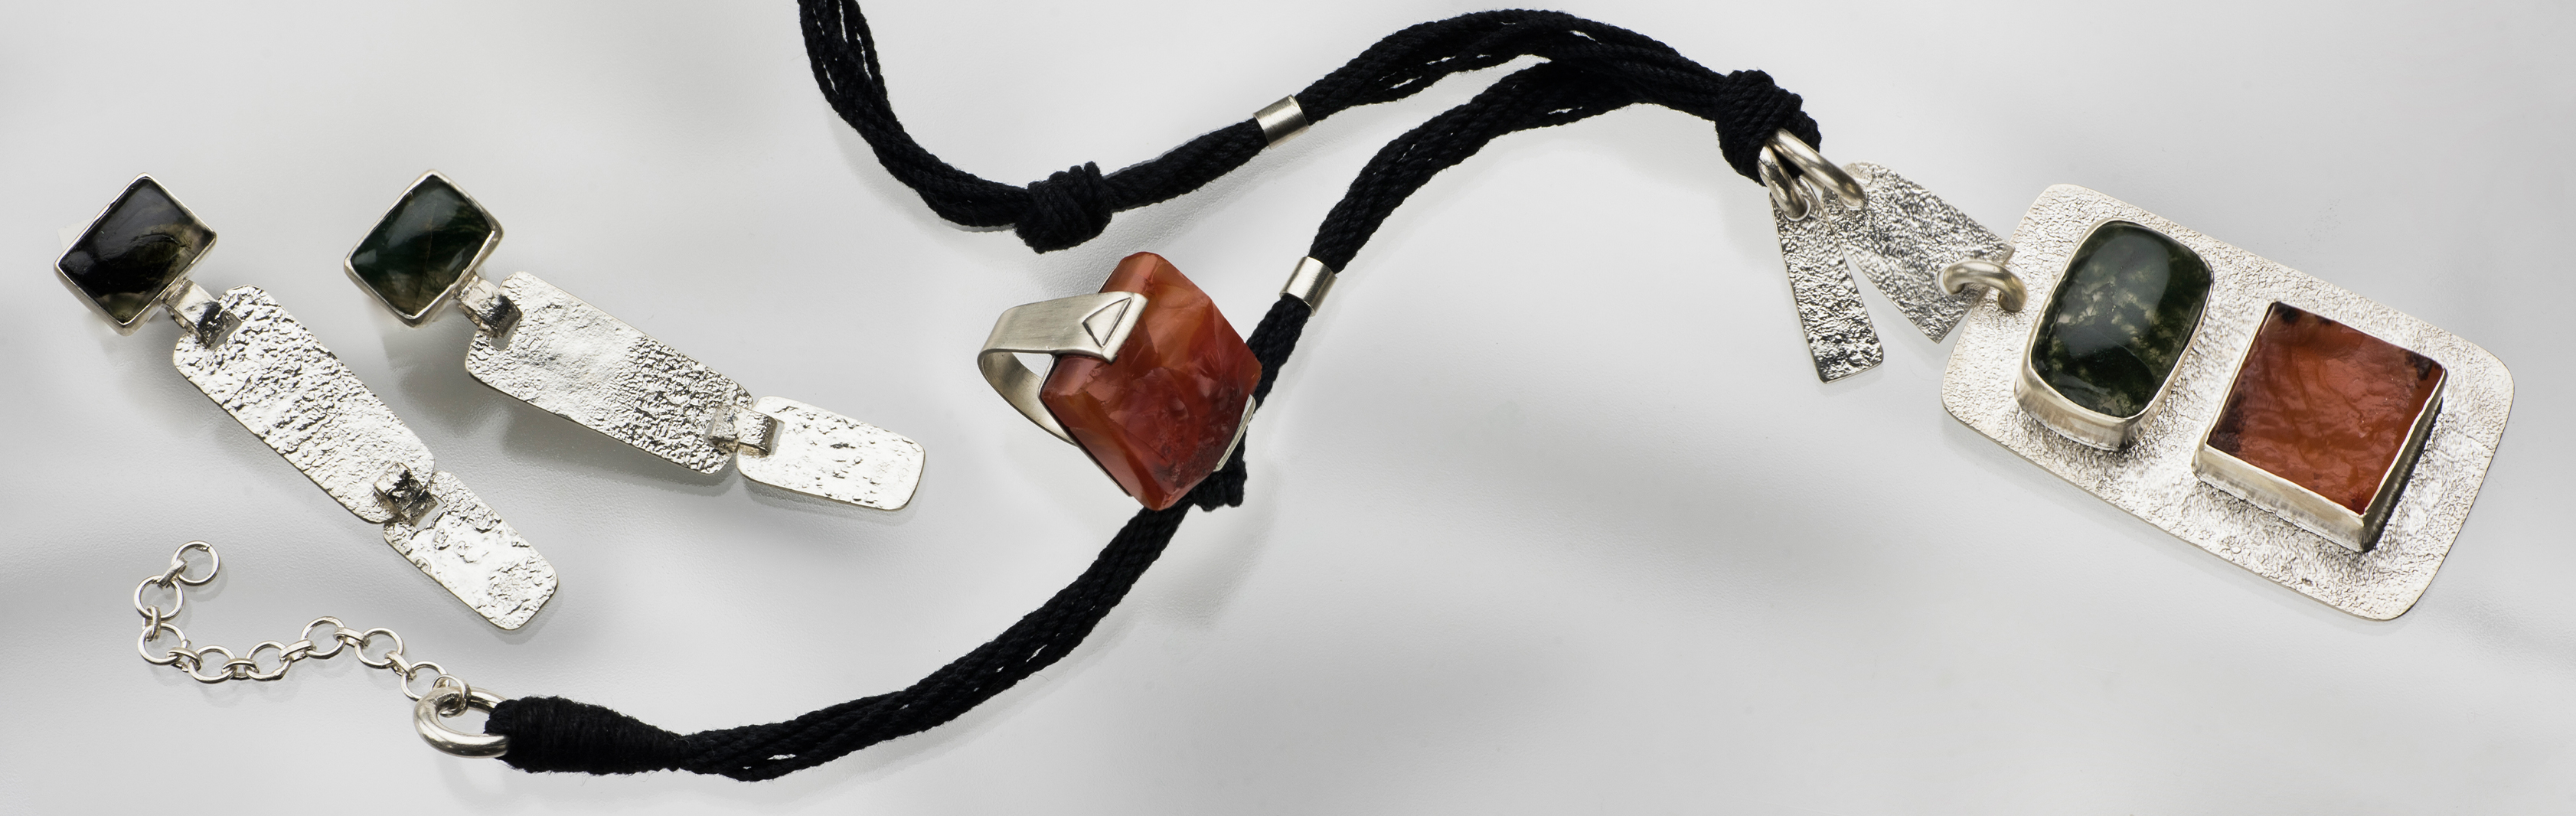 Mother Earth Collection | 925 Sterling Silver Jewelry with Jasper, Carnelian and Moss Agate